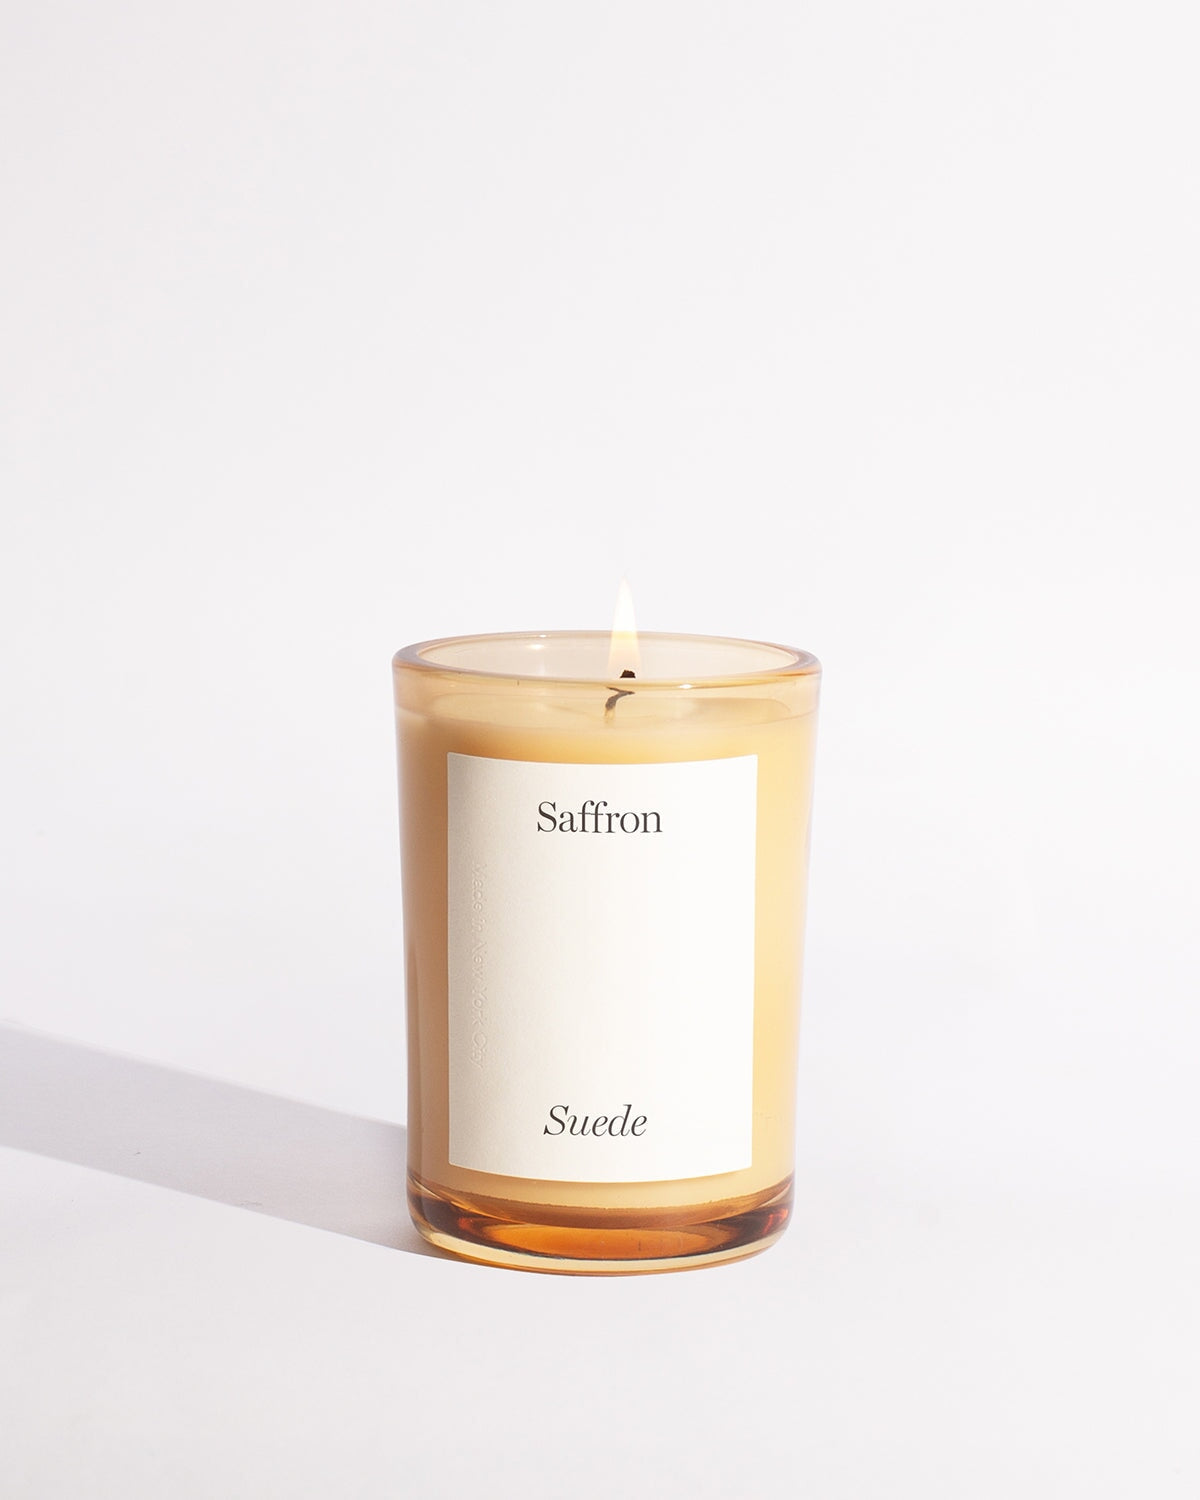 Limited Edition Saffron Suede Candle Limited Edition Brooklyn Candle Studio 